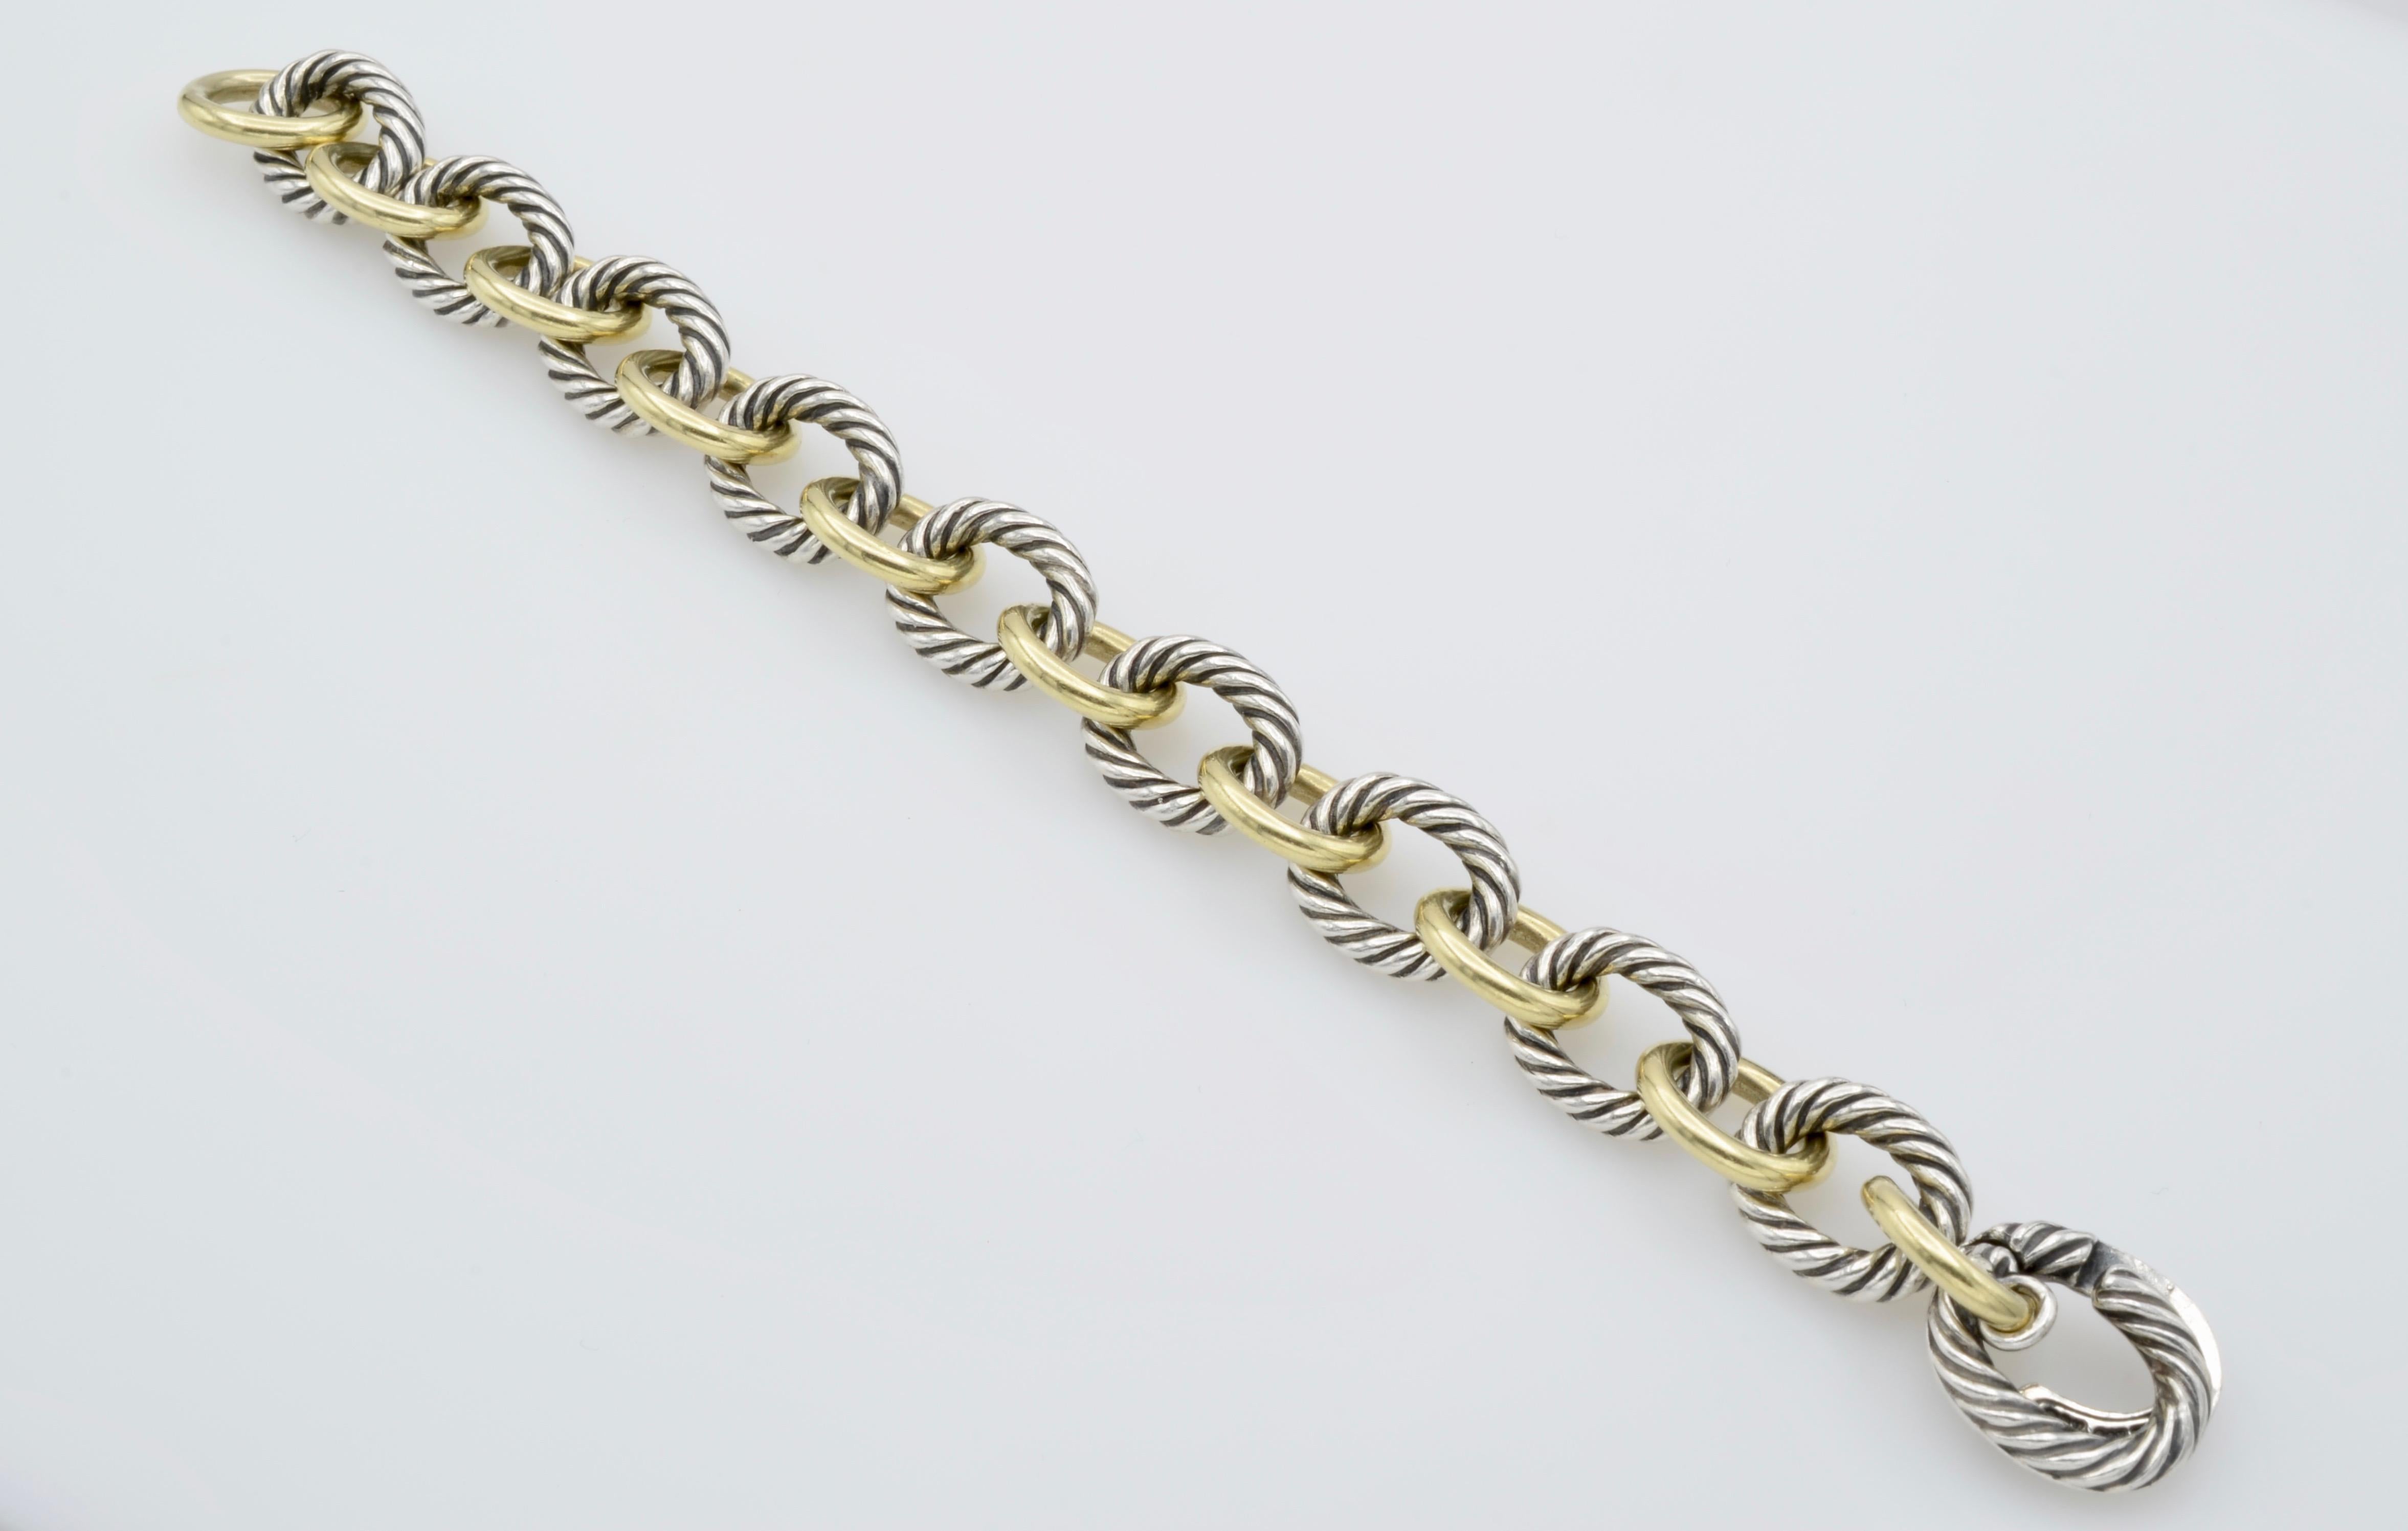 This classic link bracelet is a wonderful mixture of solid 18k gold links and twisted sterling silver links. It can be worn layered with your other bracelets and your watch as well as a stand alone 'statement' bracelet. The clasp is unique and